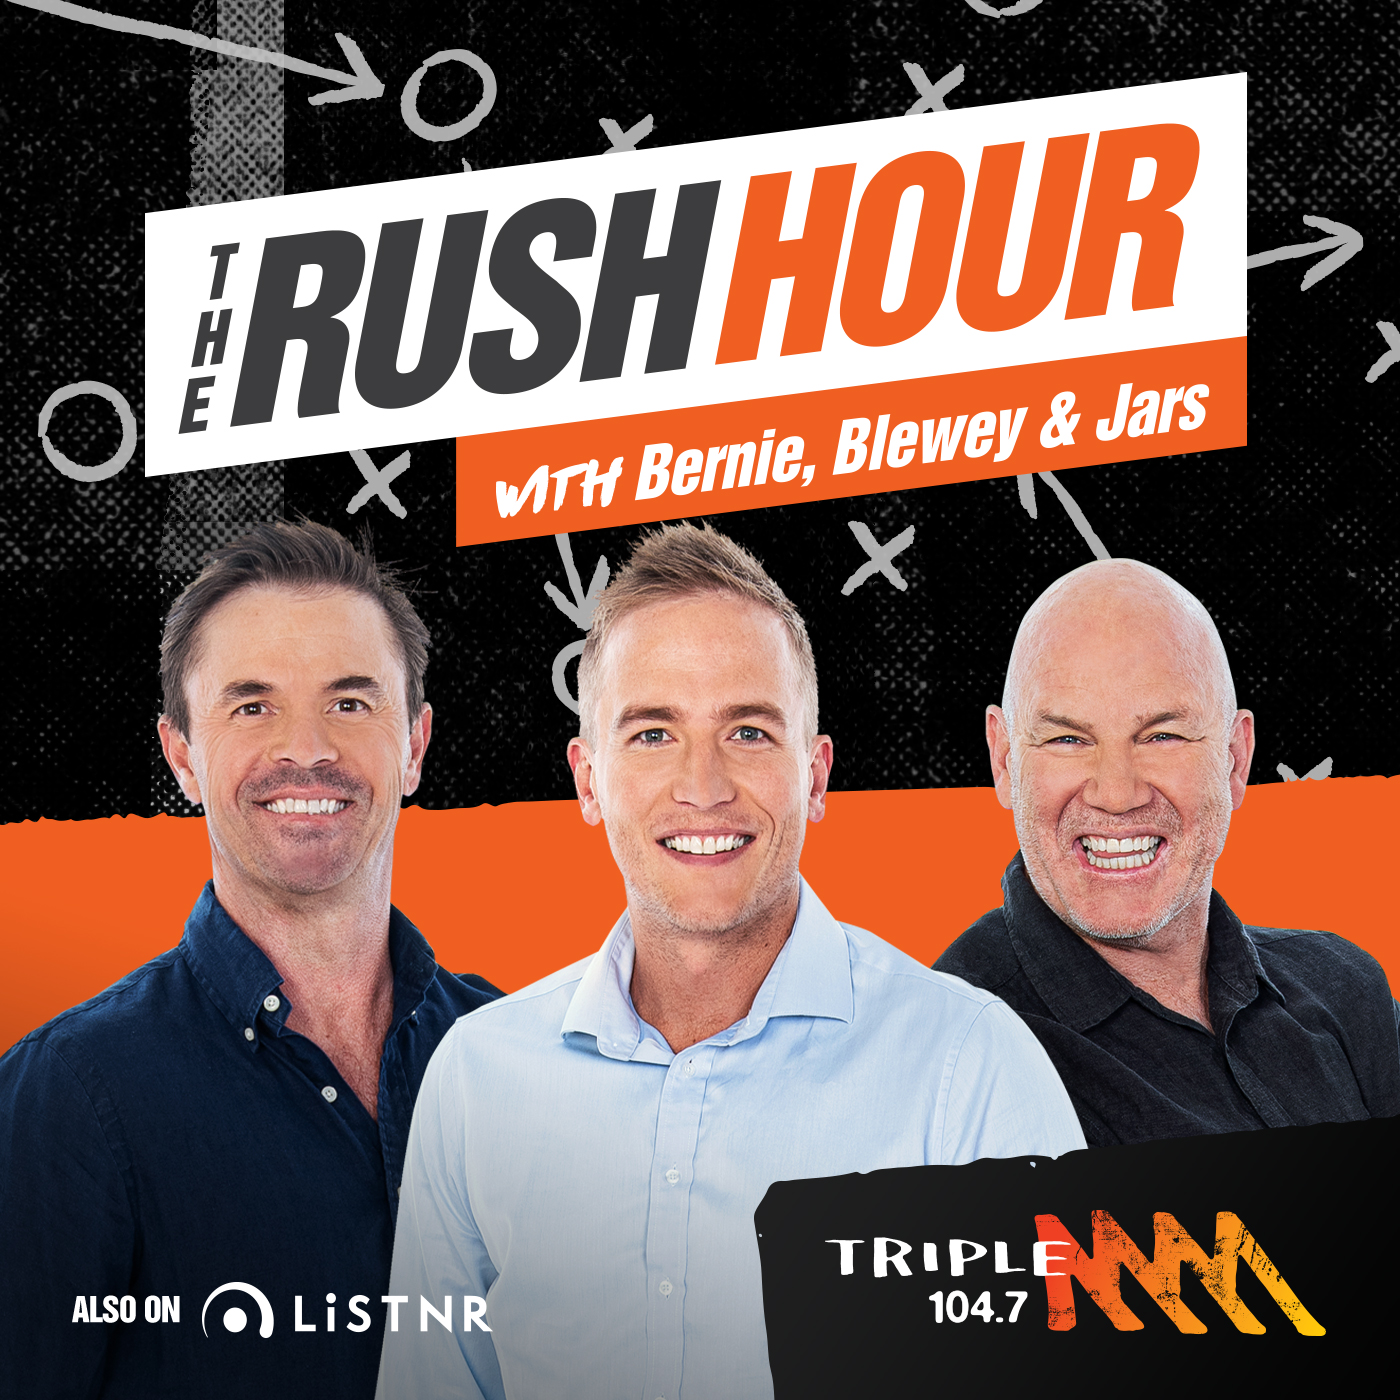 Dave Gleeson on his return to Triple M with his new show, Triple M Nights with Dave Gleeson!